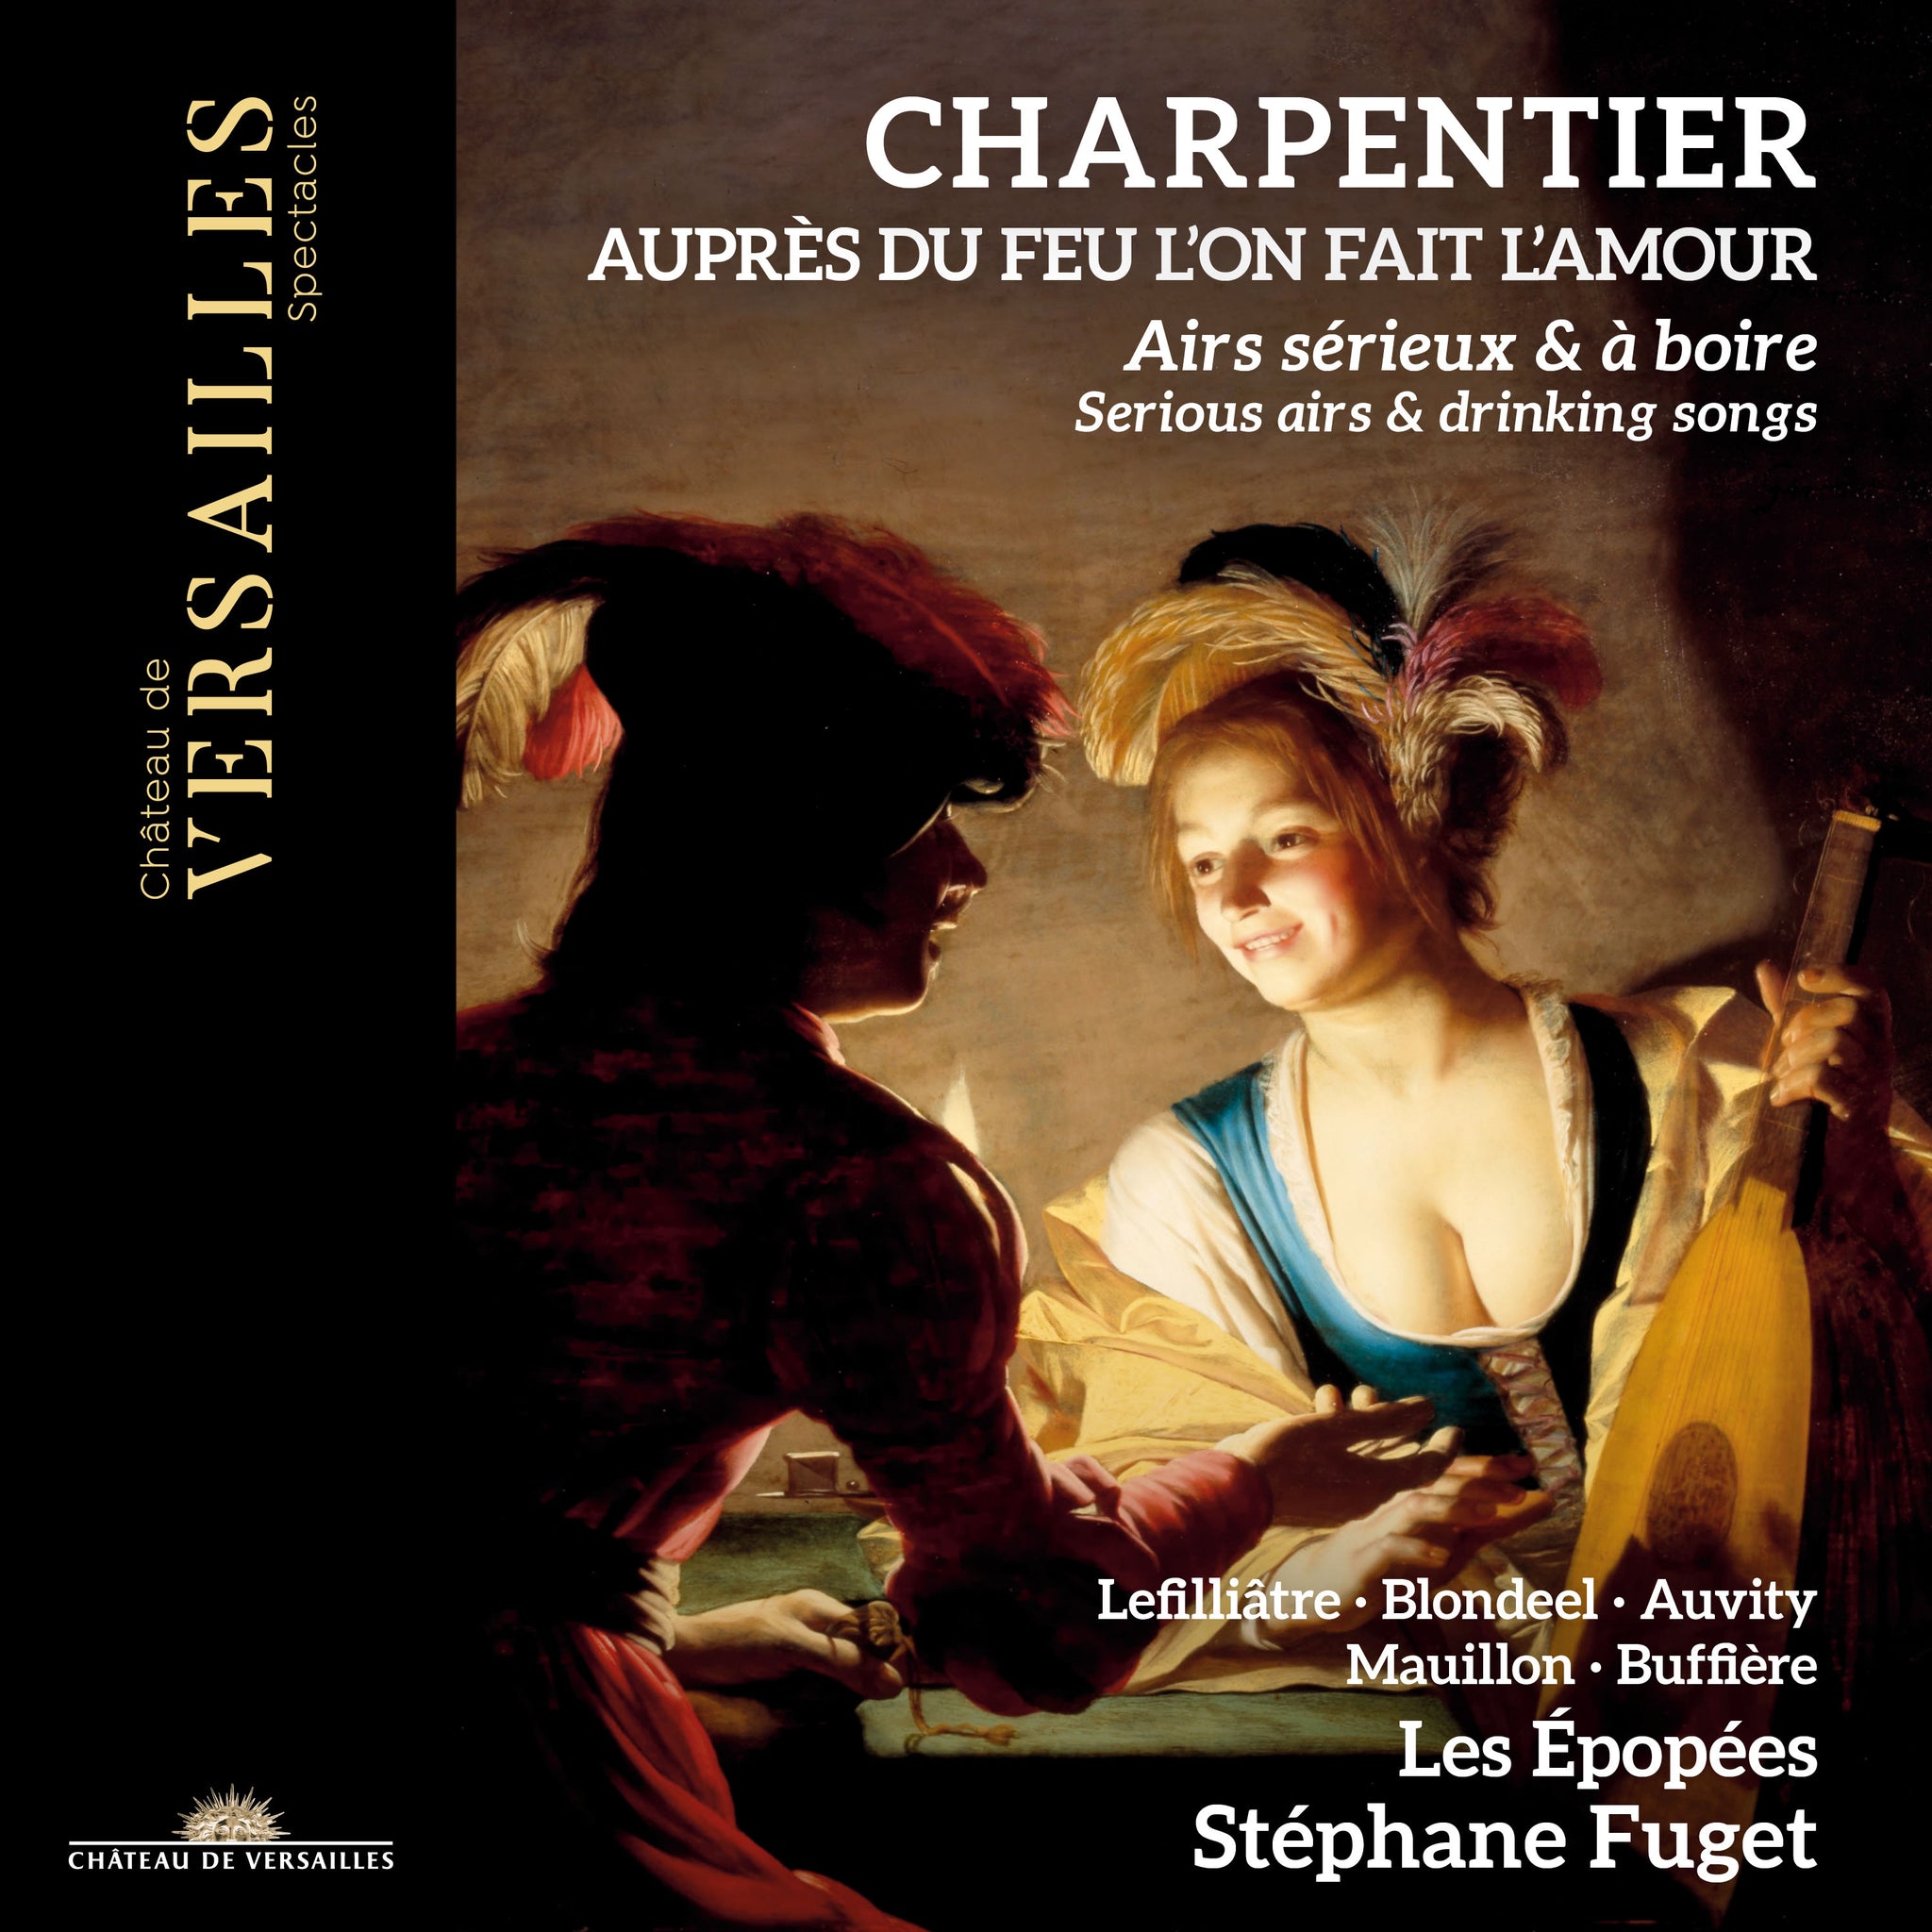 Charpentier: Aupres du feu l'on fait l'amour - Serious Airs & Drinking Songs